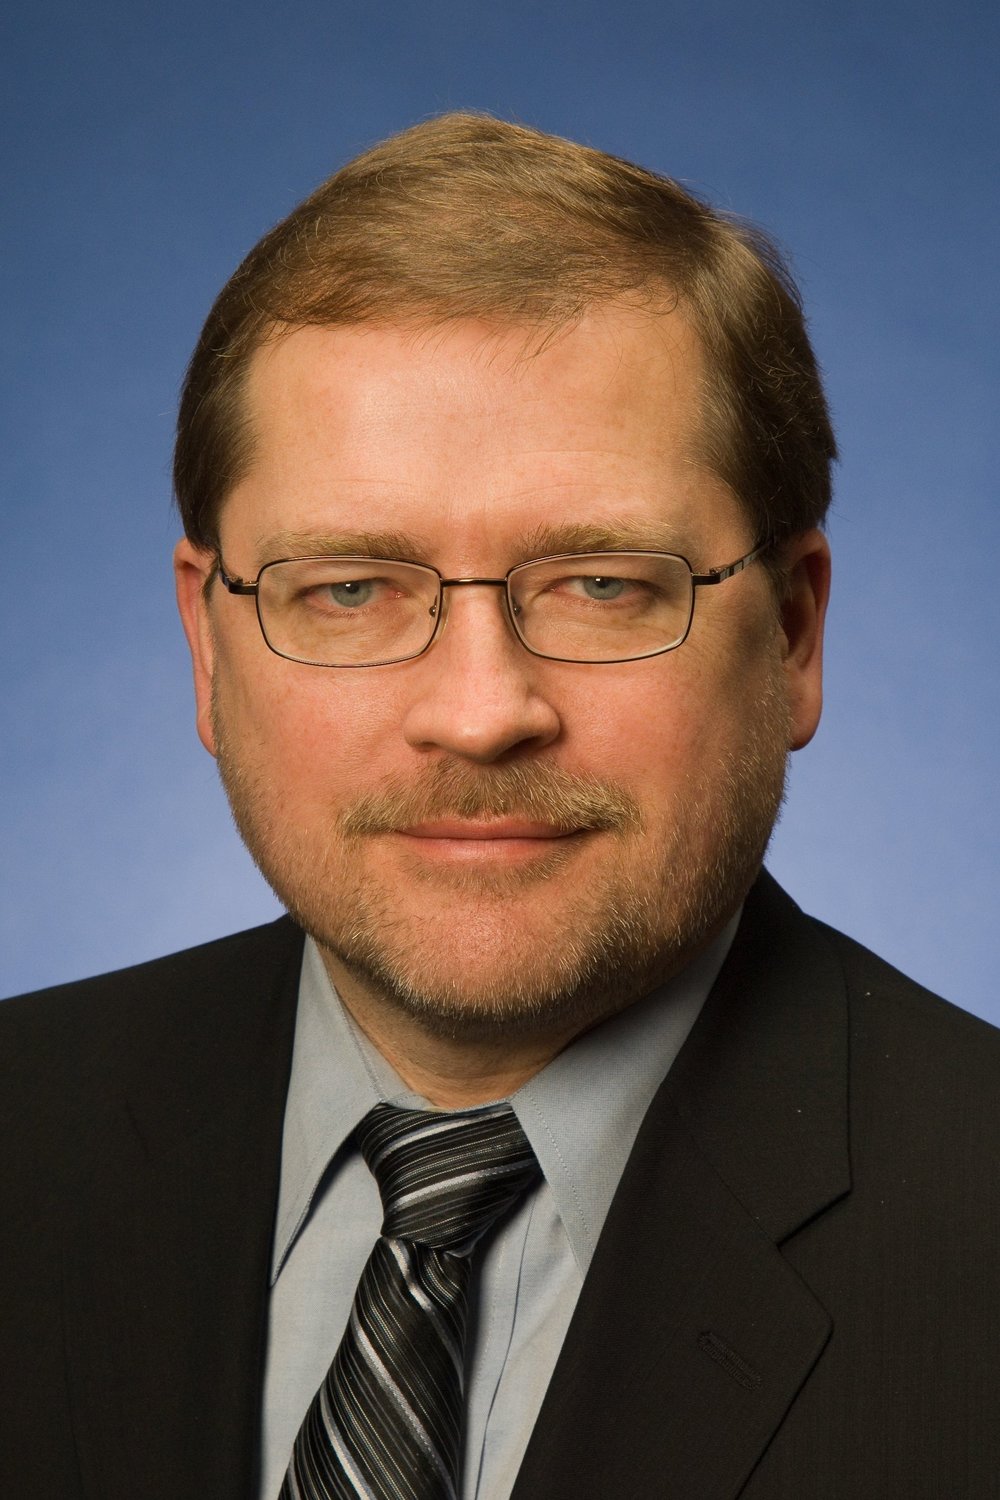 GROVER NORQUIST   President Americans for Tax Reform